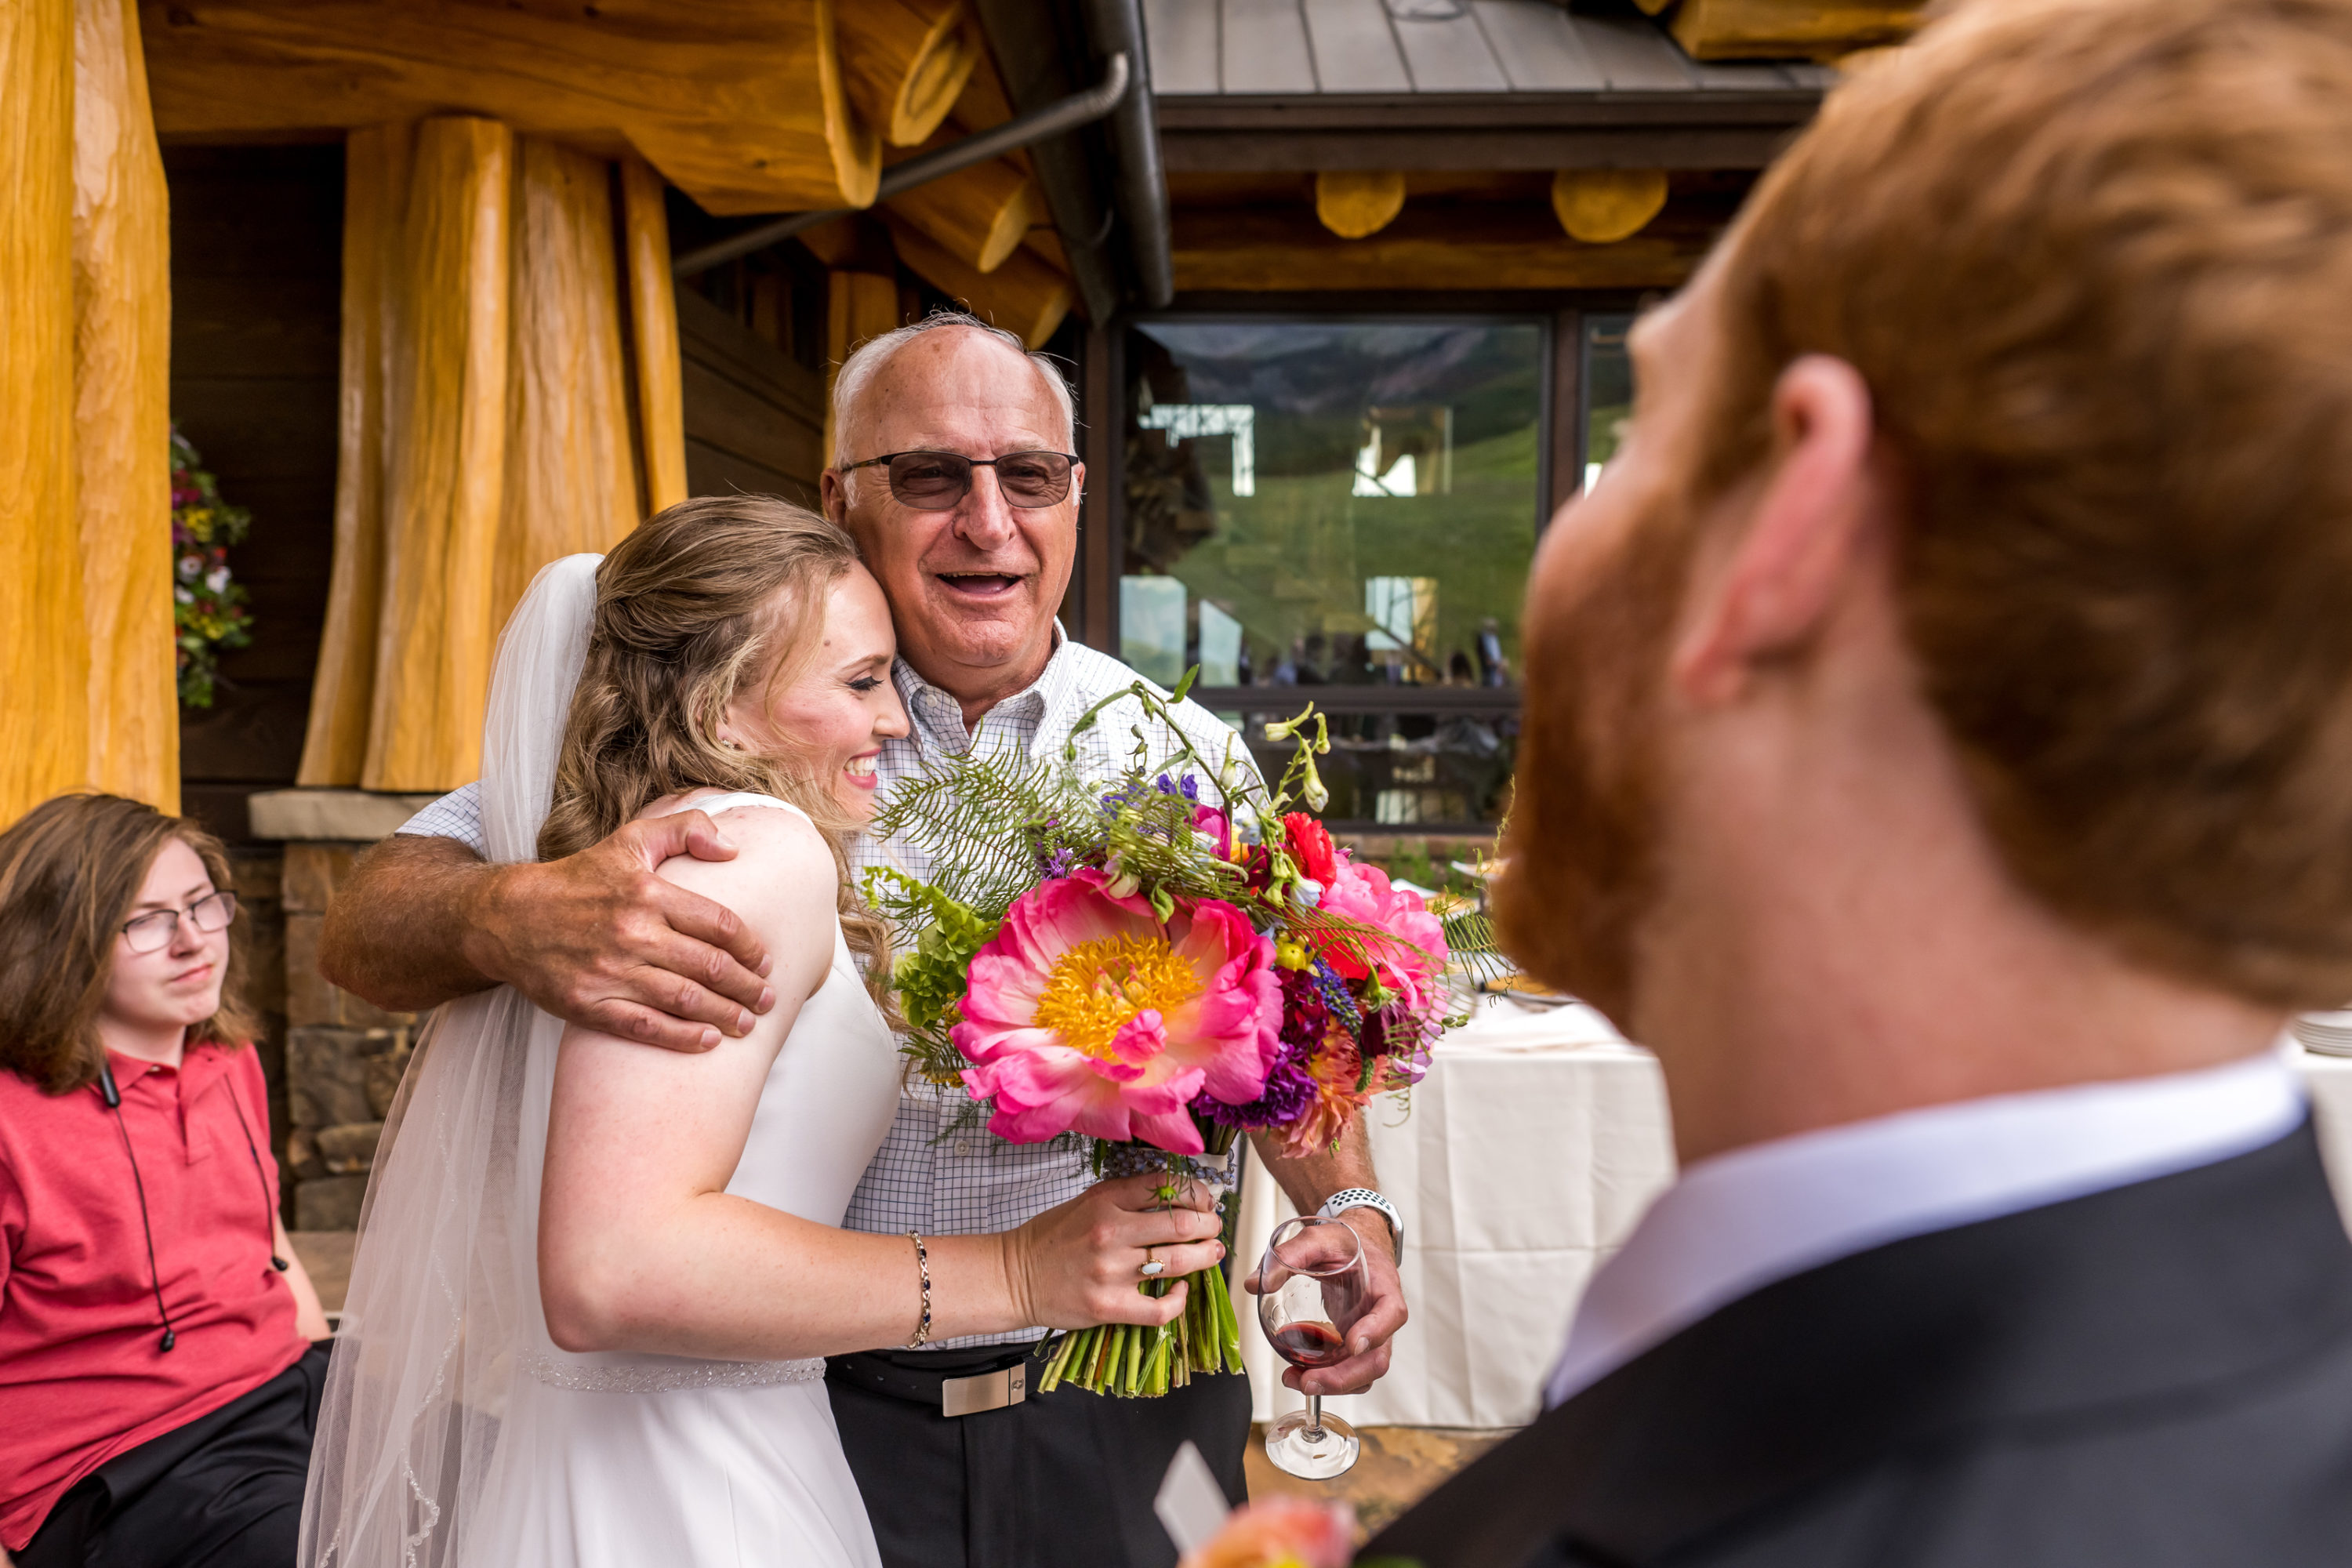 The bride embraces a family member as the groom looks on during their wedding in Telluride, Colorado.